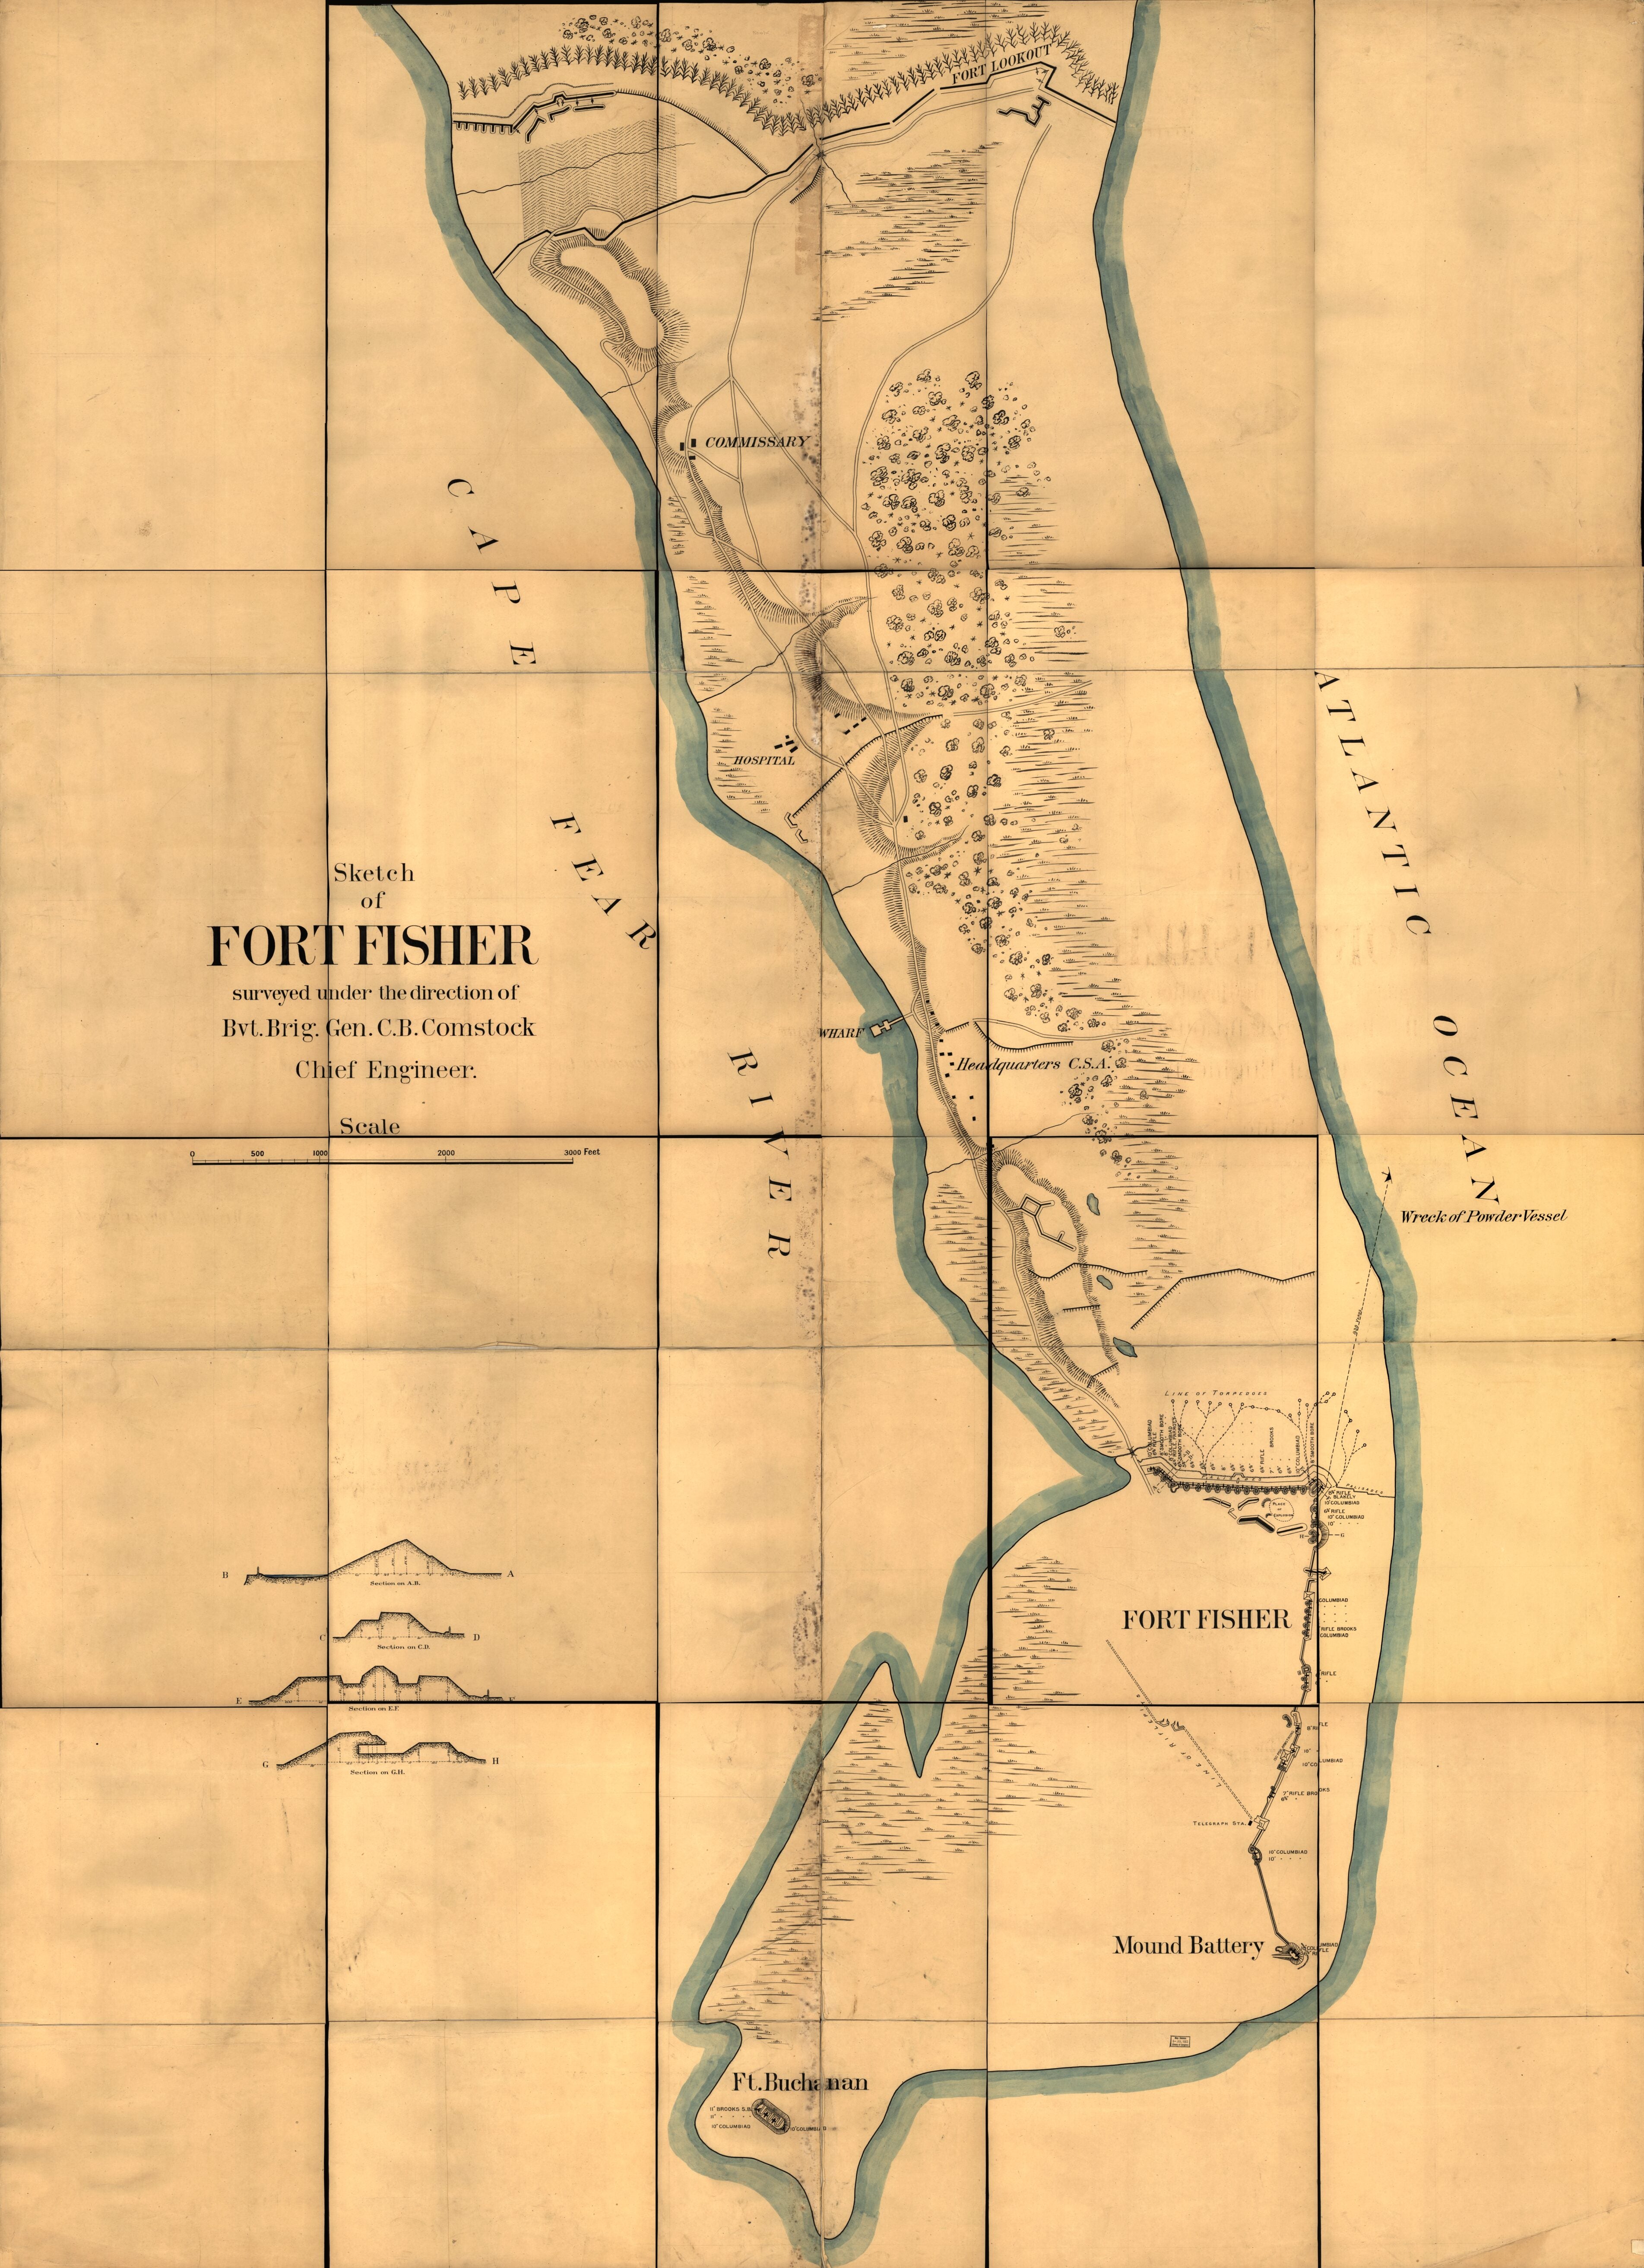 This old map of Sketch of Fort Fisher from 1863 was created by C. B. (Cyrus Ballou) Comstock in 1863